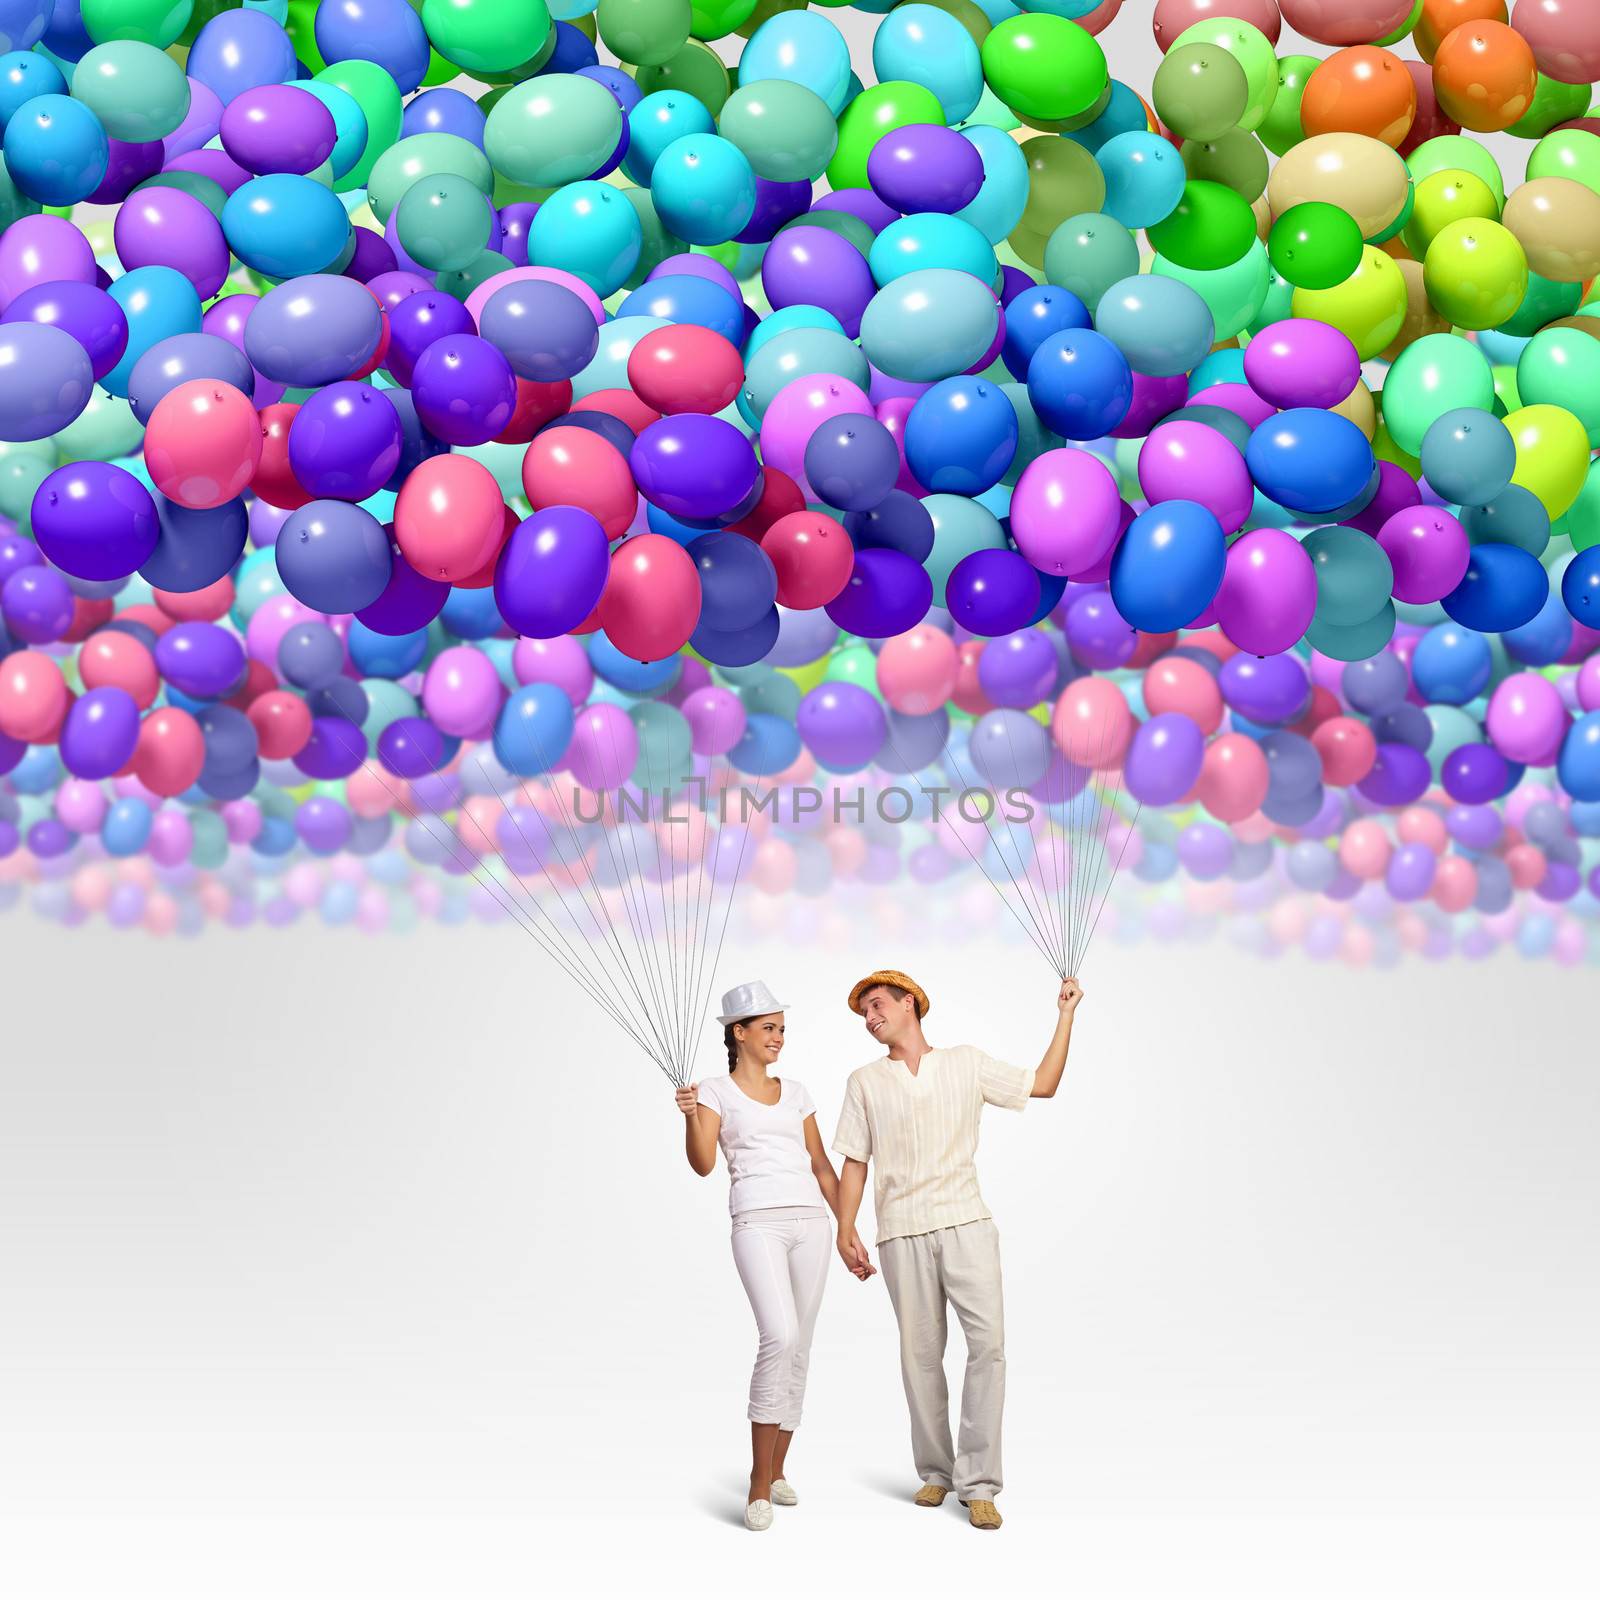 Image of young couple holding bunch of colorful balloons